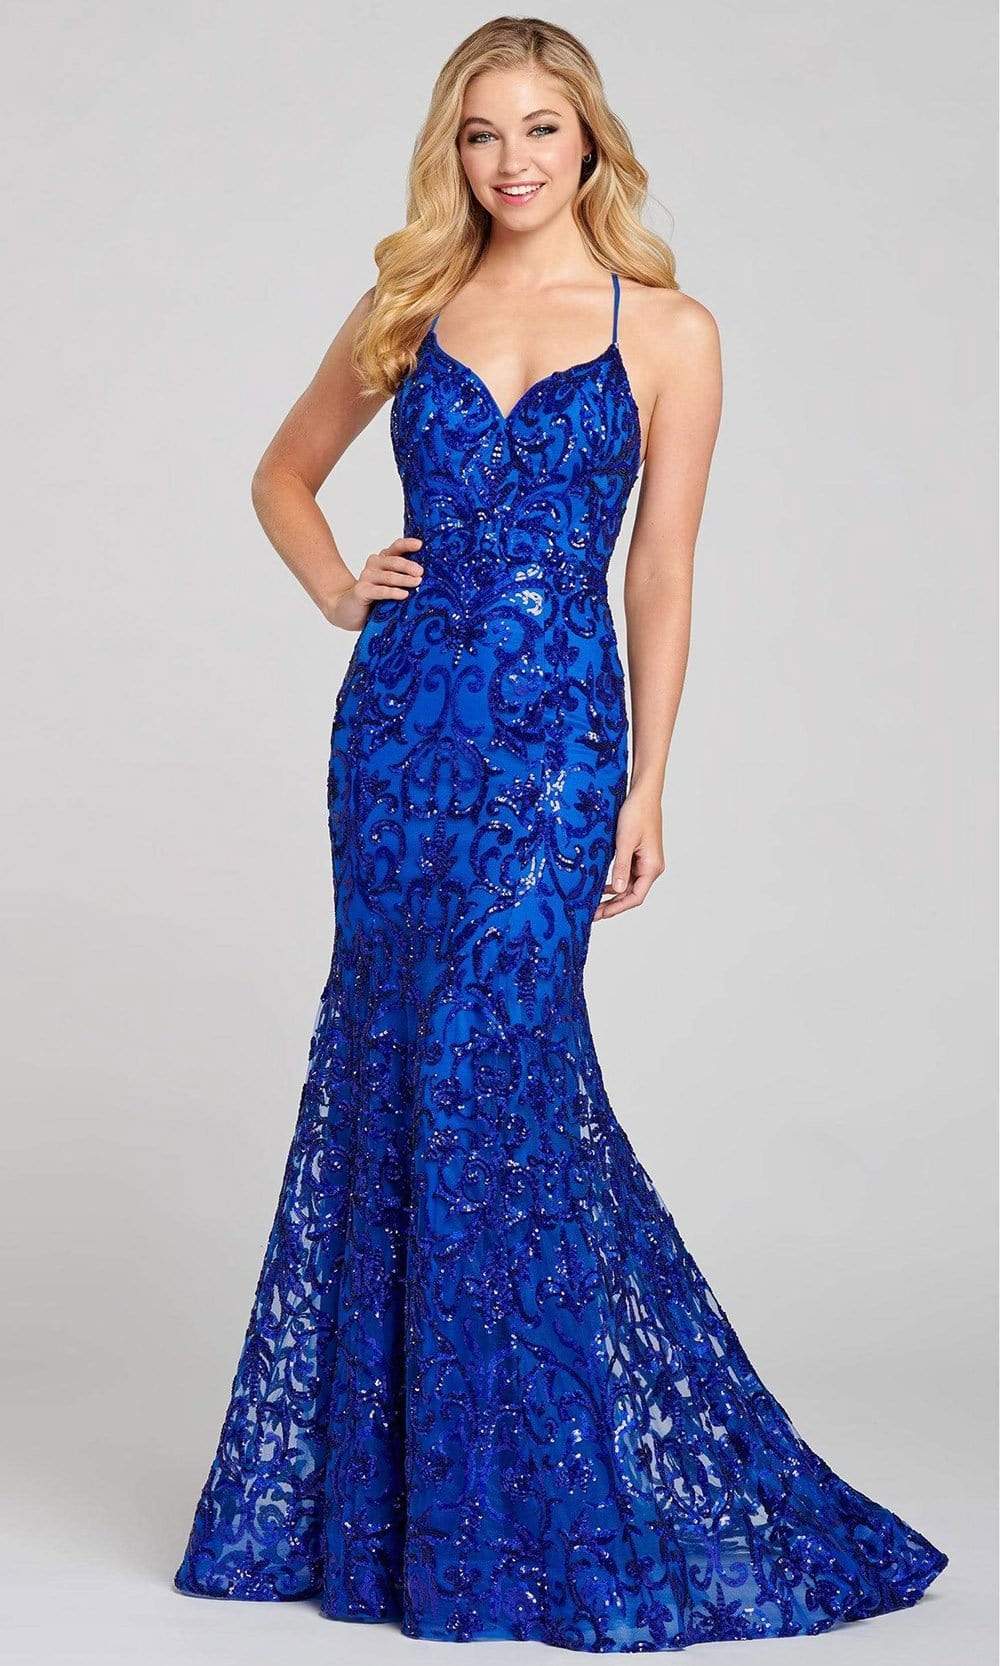 Colette for Mon Cheri - CL12130 Sequined Mermaid Modest Prom Gown
